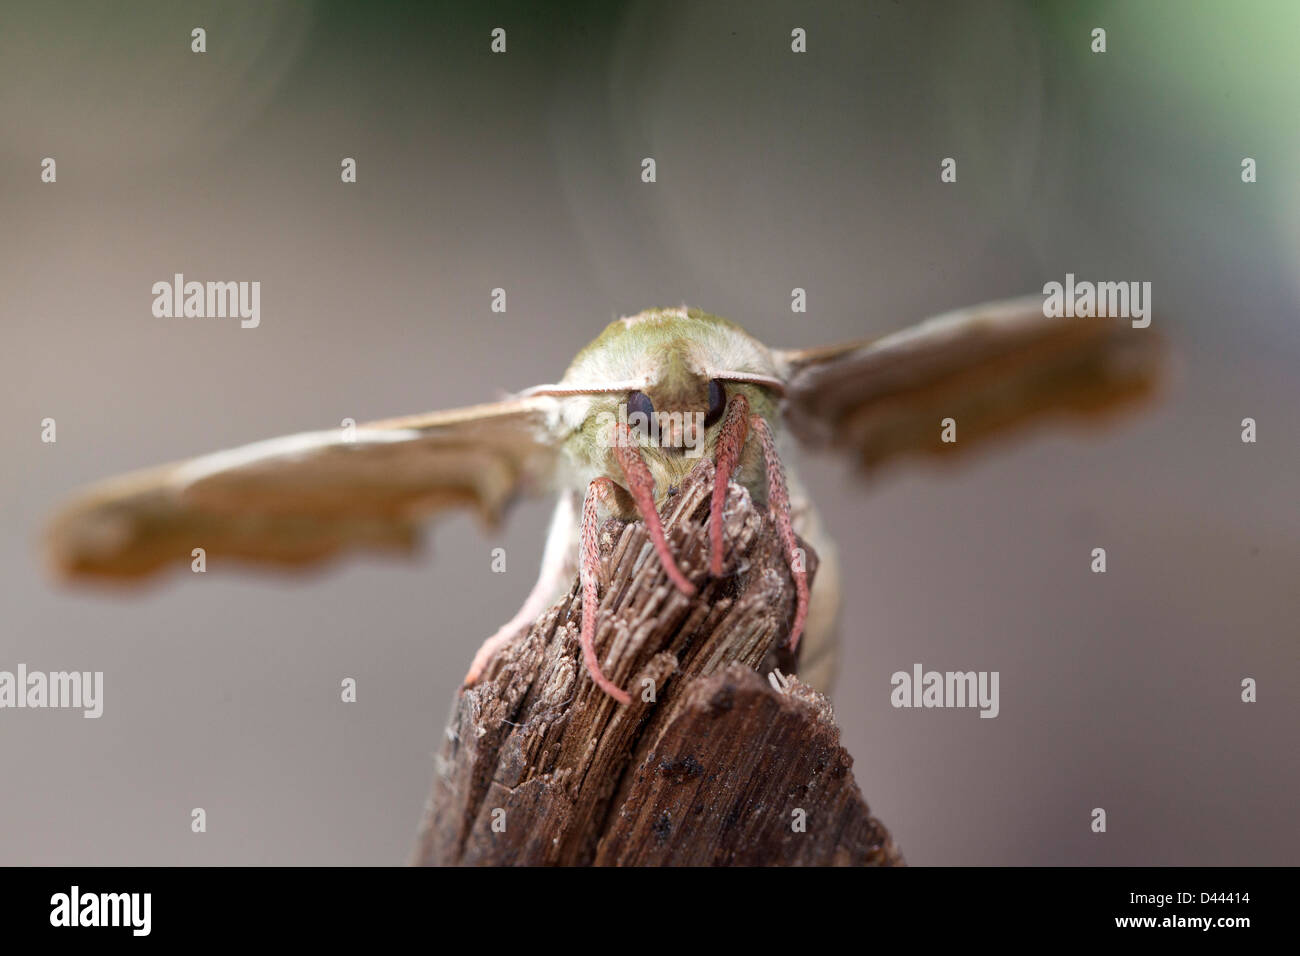 Front view of a moth on a piece of wood. Stock Photo